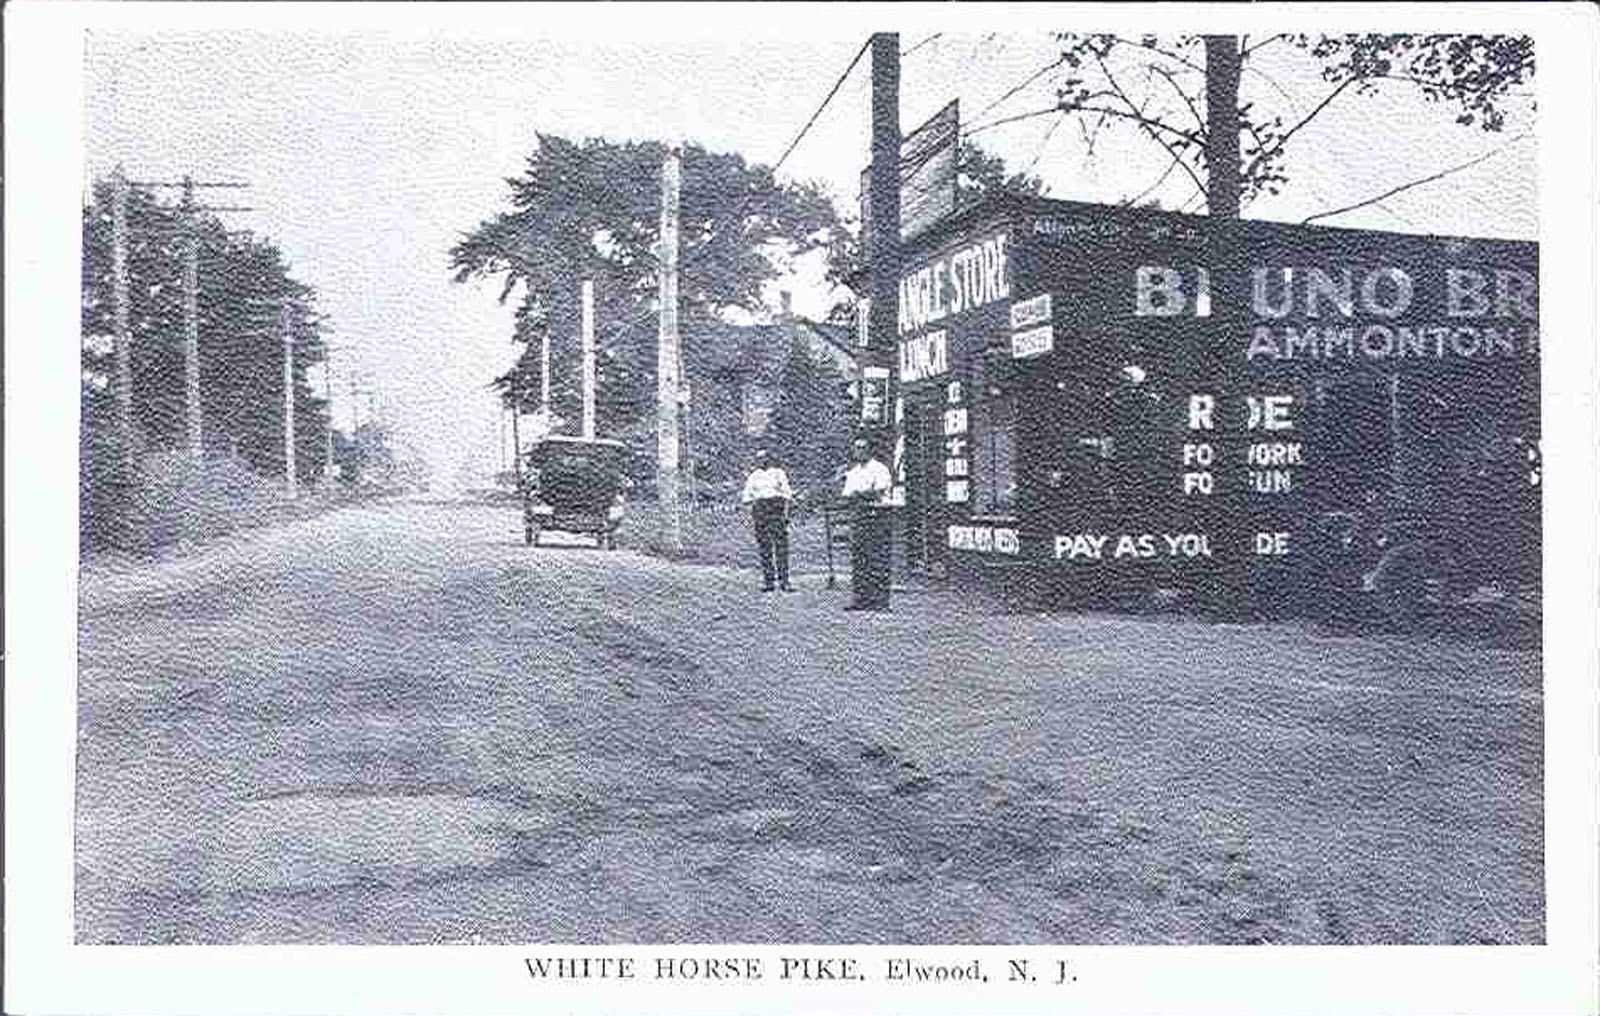 Elwood - White horse Pike and store